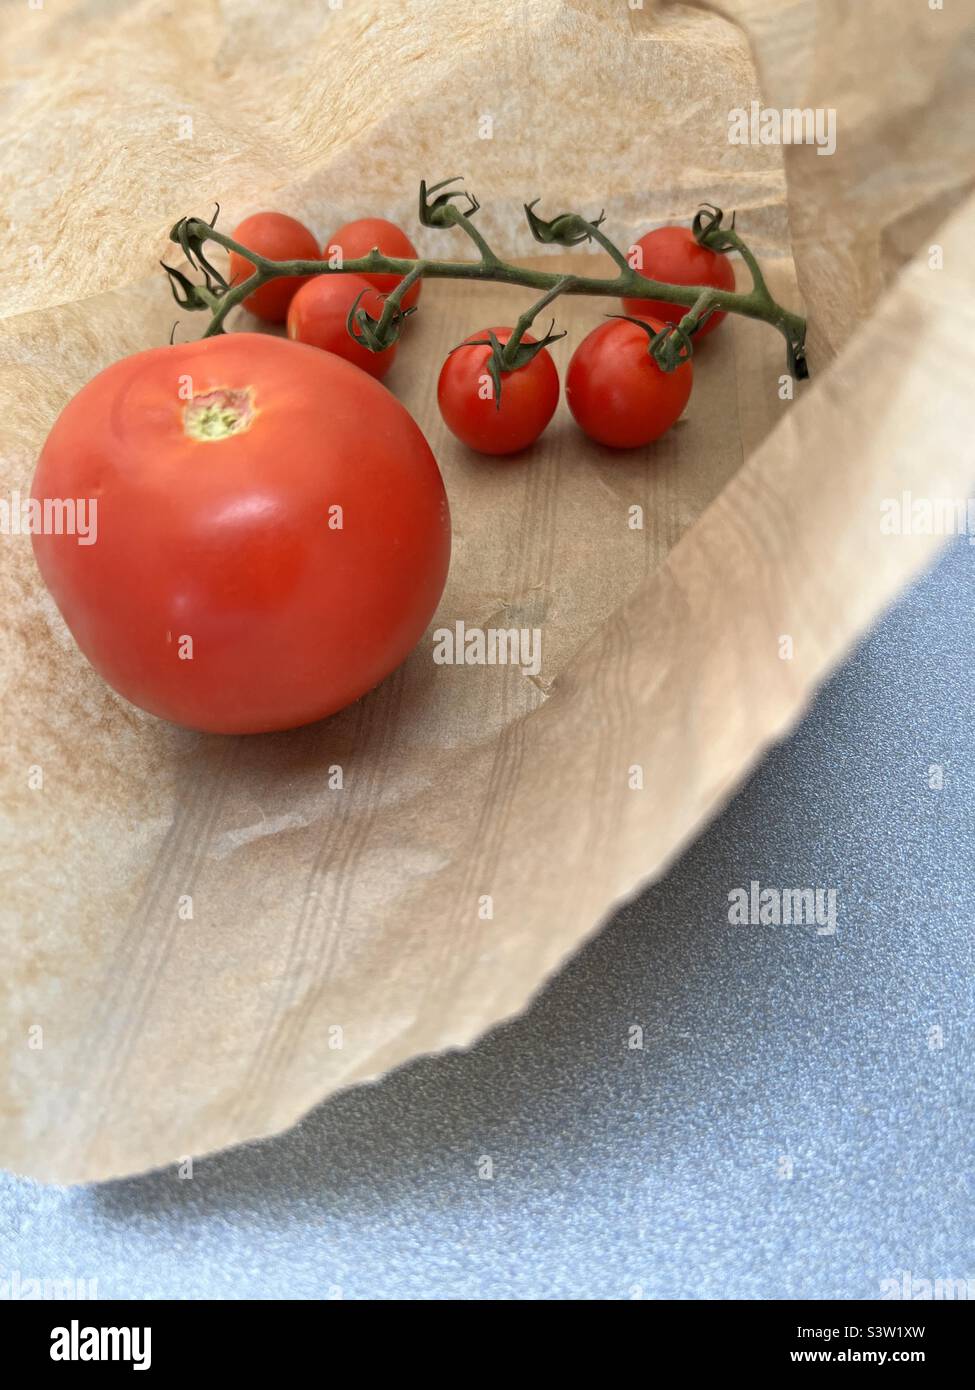 Tomatoes in a paper bag Stock Photo